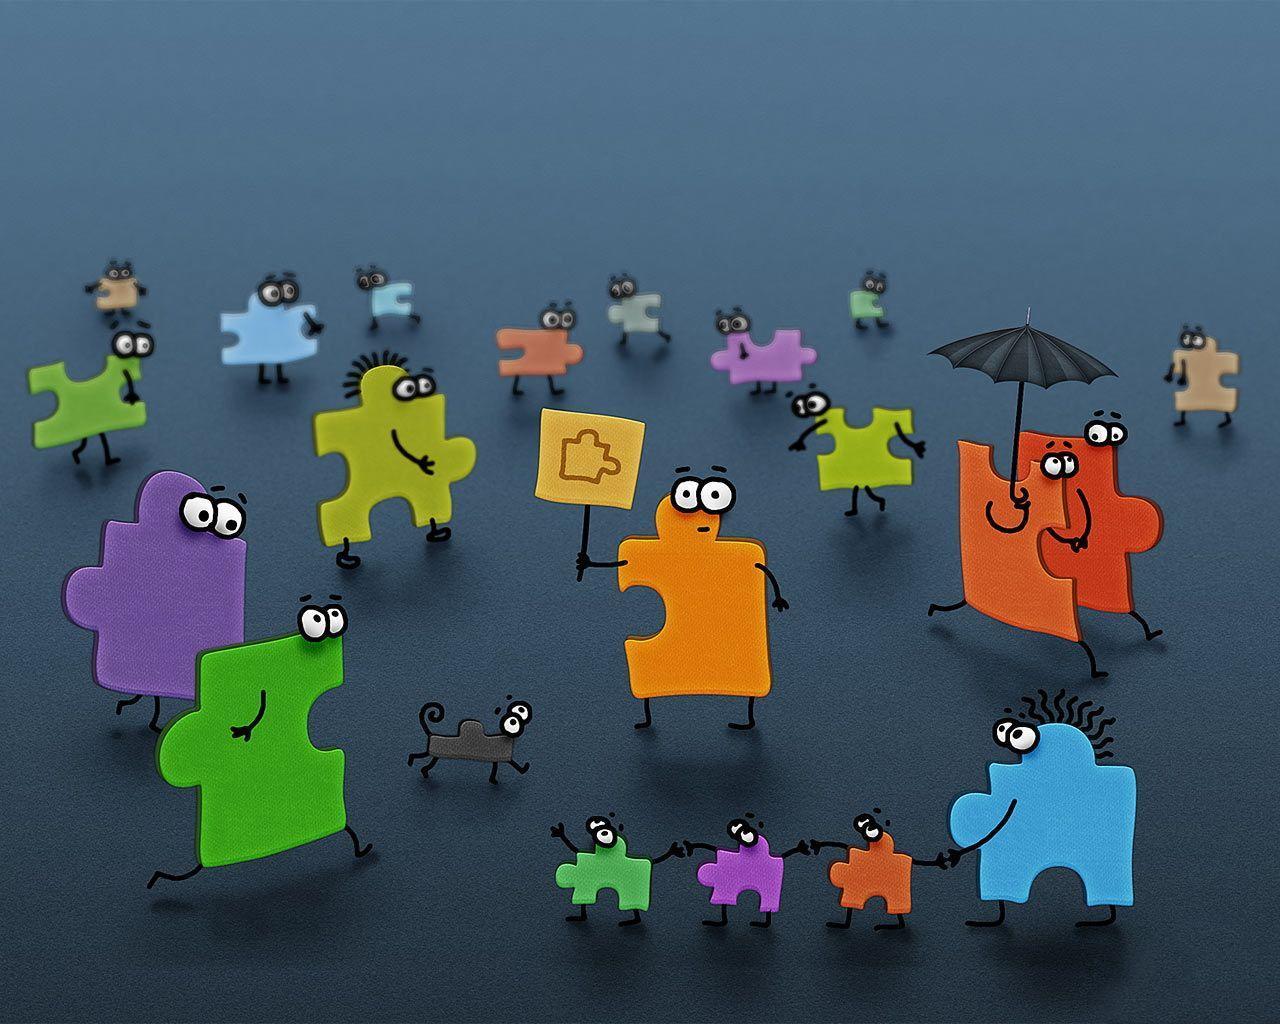 Puzzle Wallpaper, Adorable 43 Puzzle Photo High Resolution. SHX